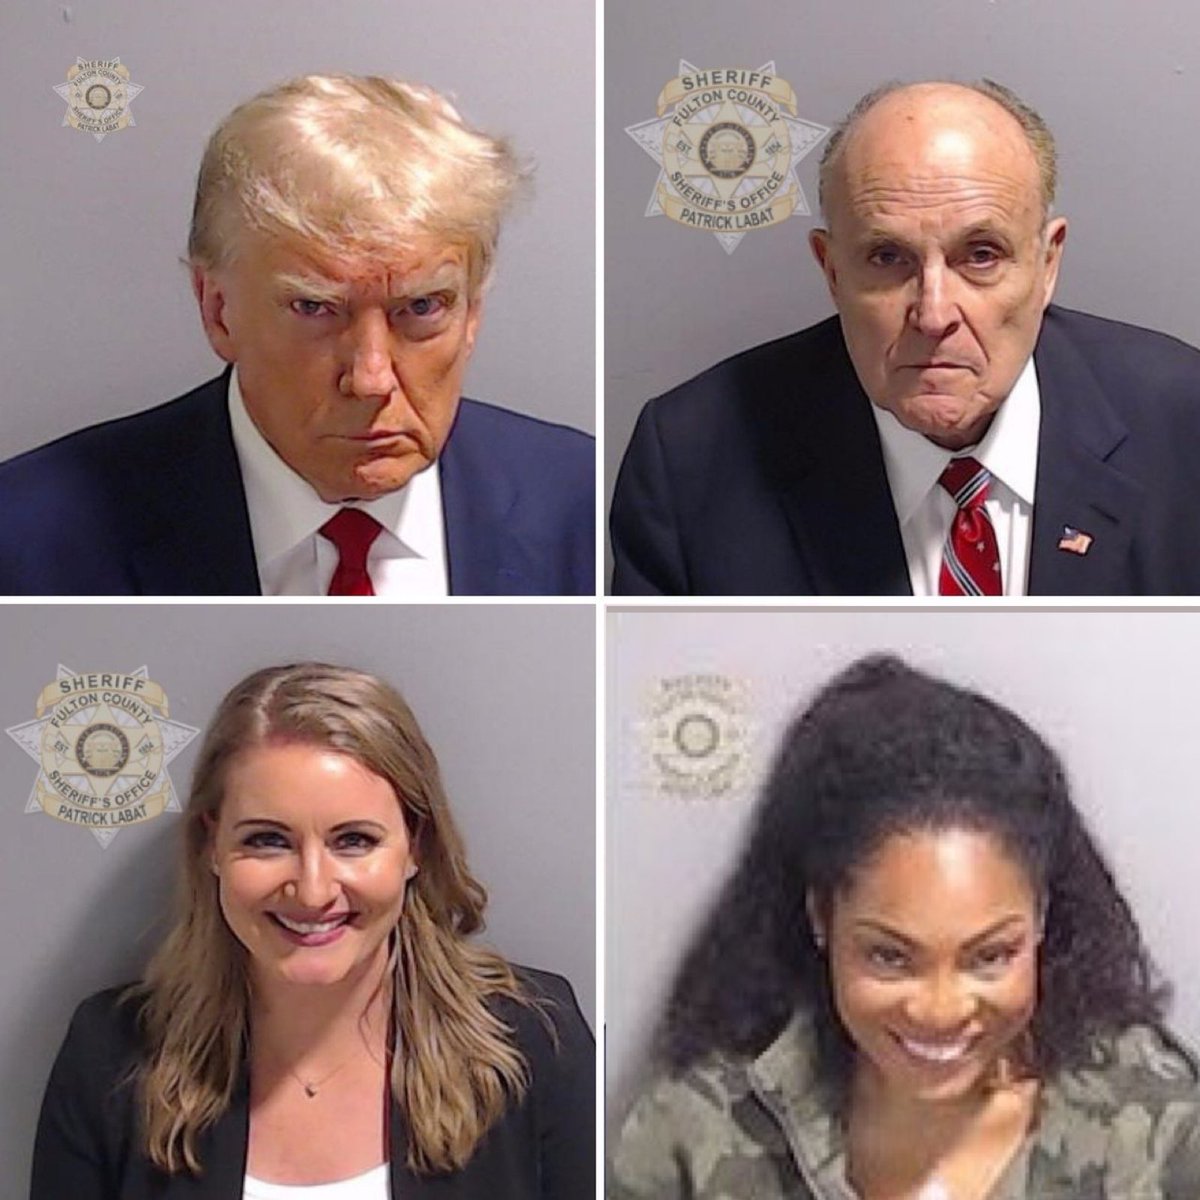 With the purchase of any Rudy Mugshot NFT, you get a free clump of hair from his attorney.